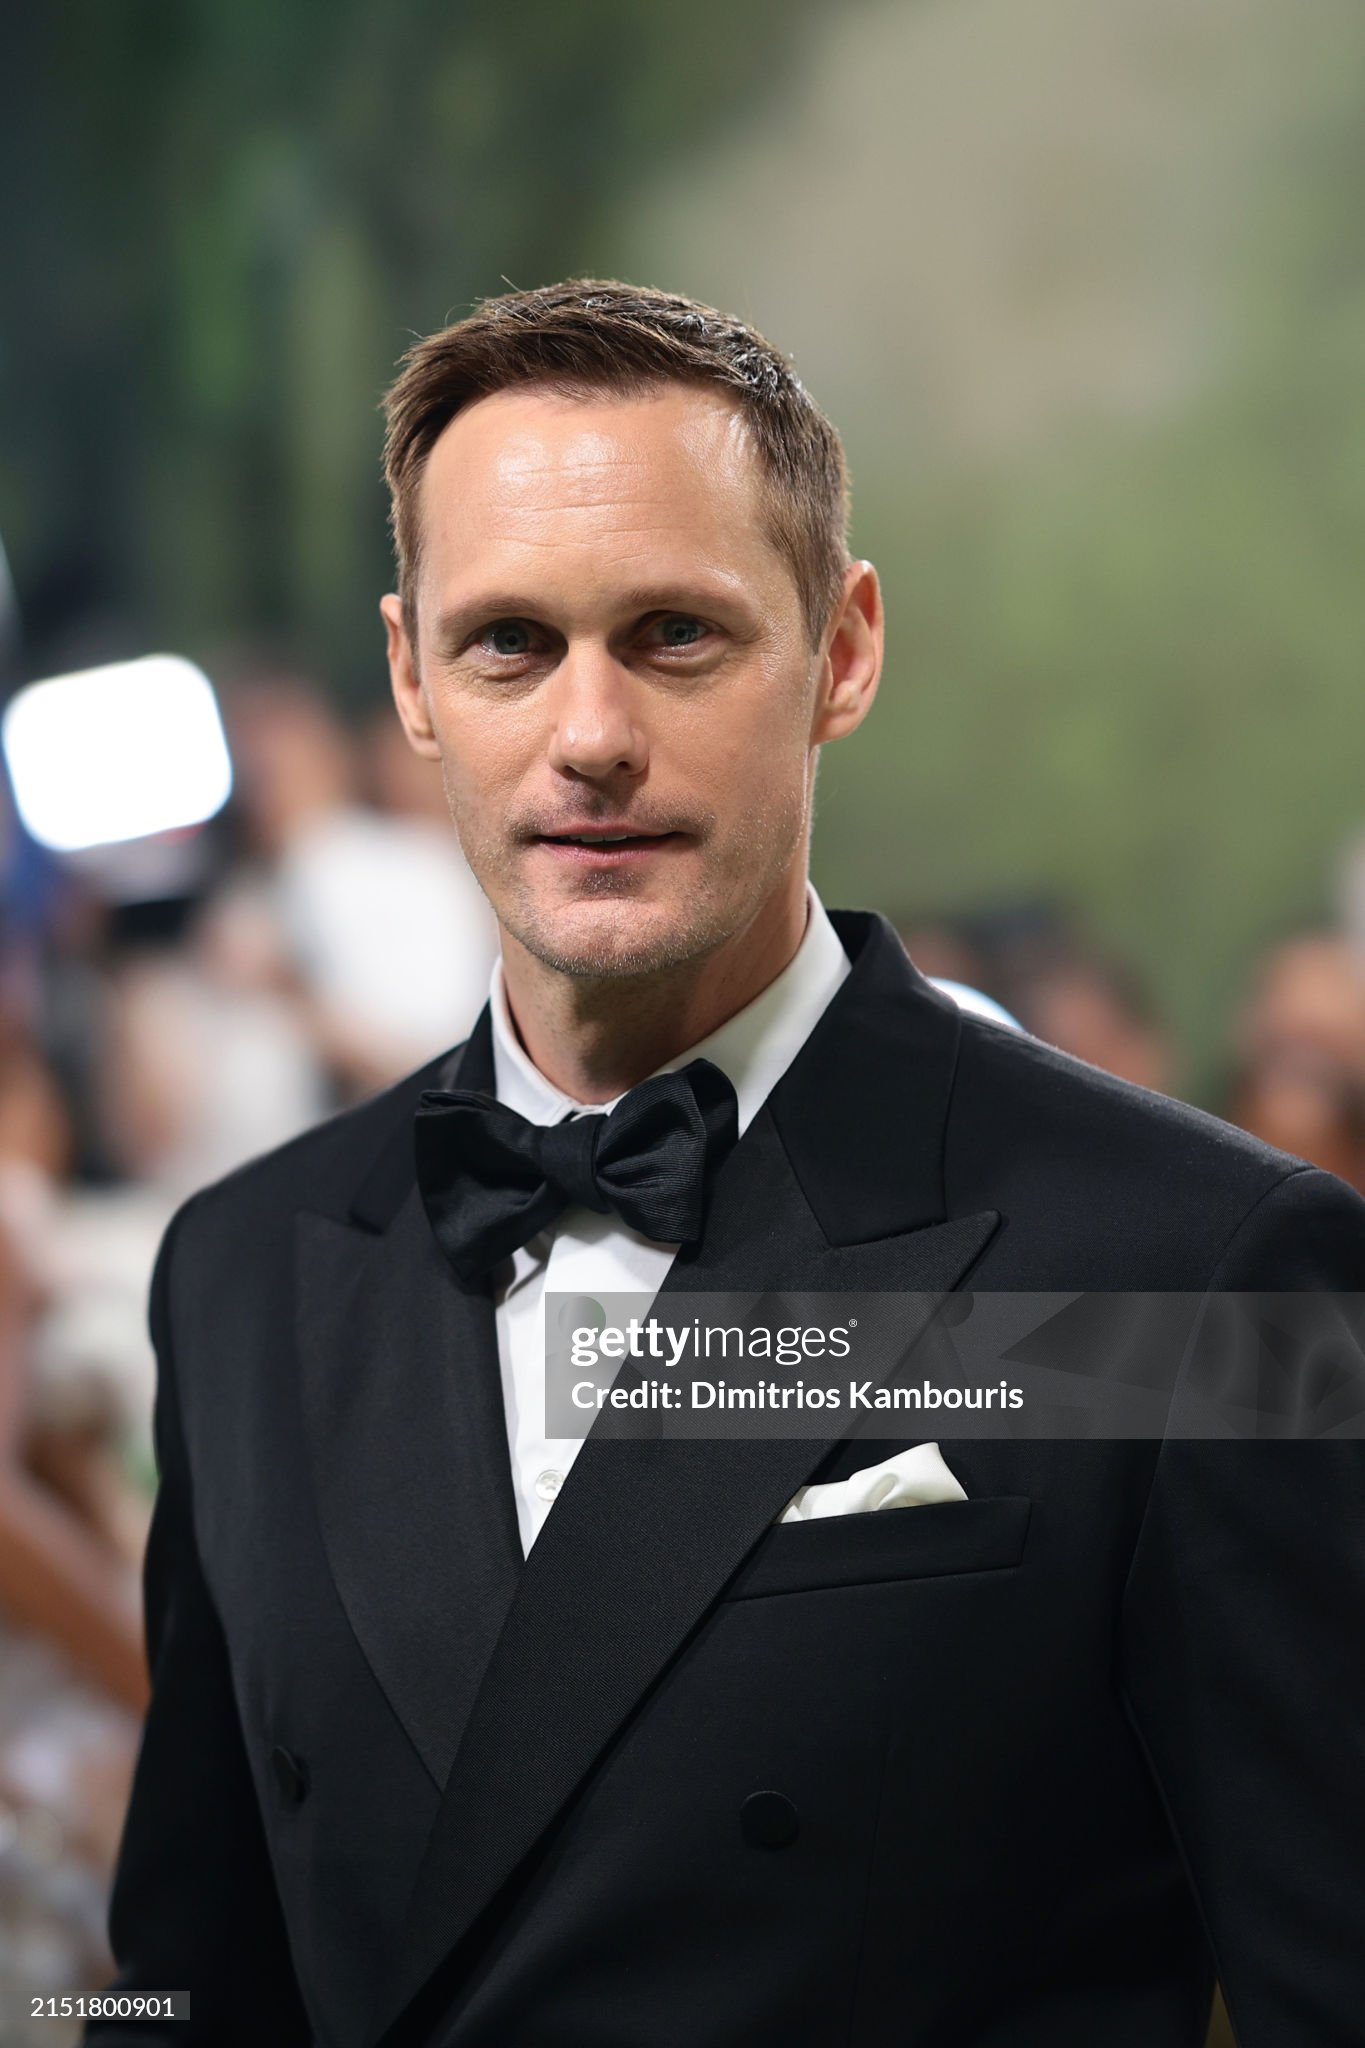 gettyimages-2151800901-2048x2048.jpg